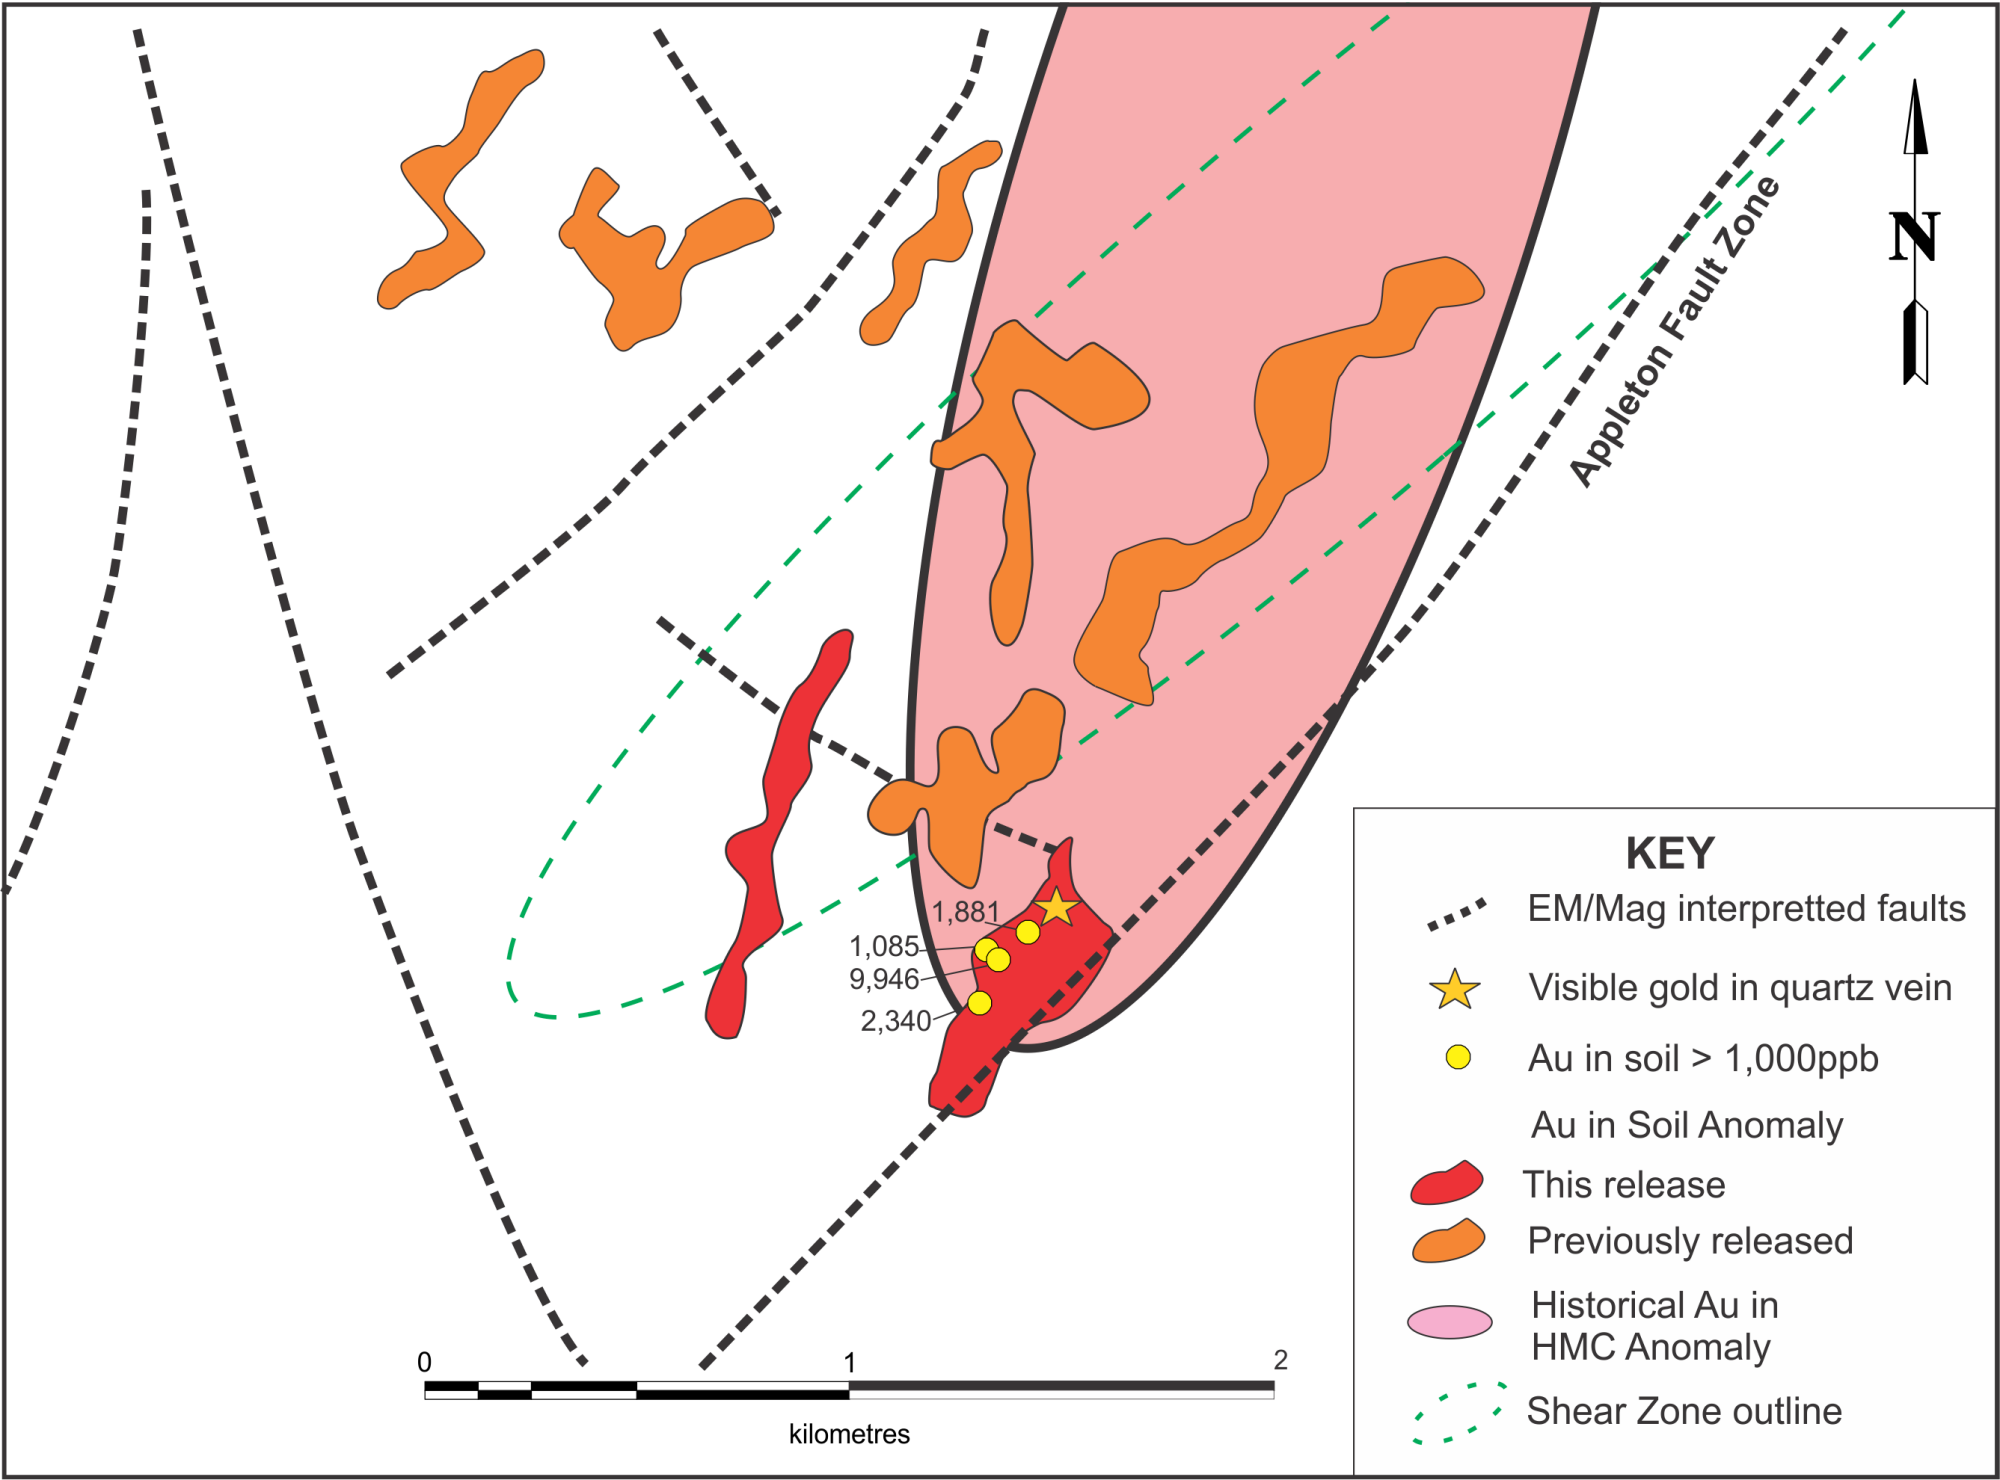 Labrador Gold Announces High Grade Gold in Soil Samples at Kingsway Property